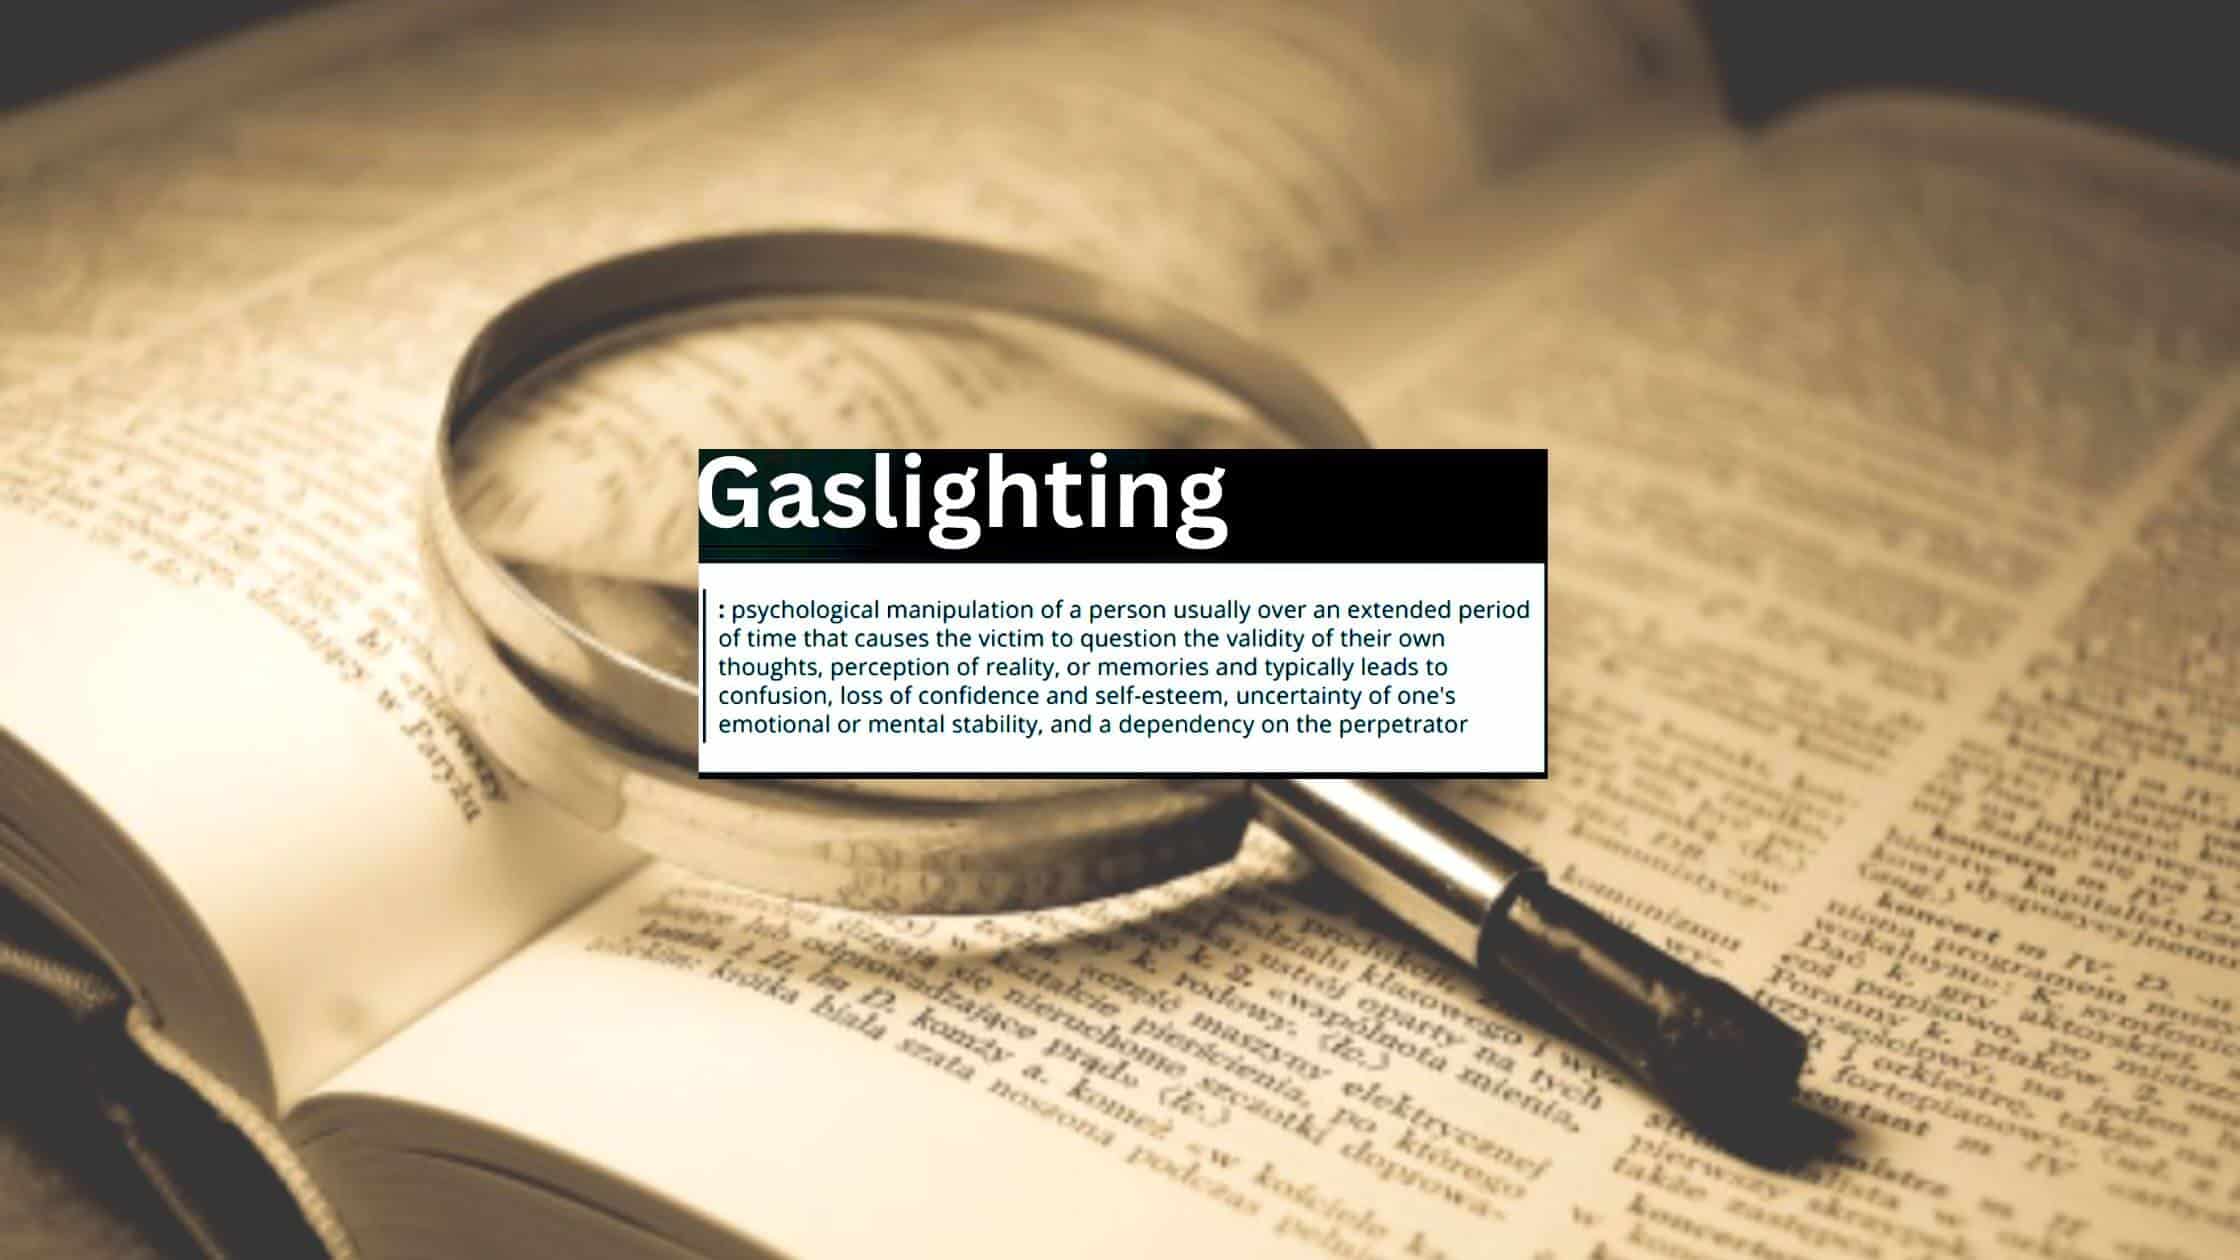 The Word Of The Year From Merriam-Webster Is "Gaslighting"